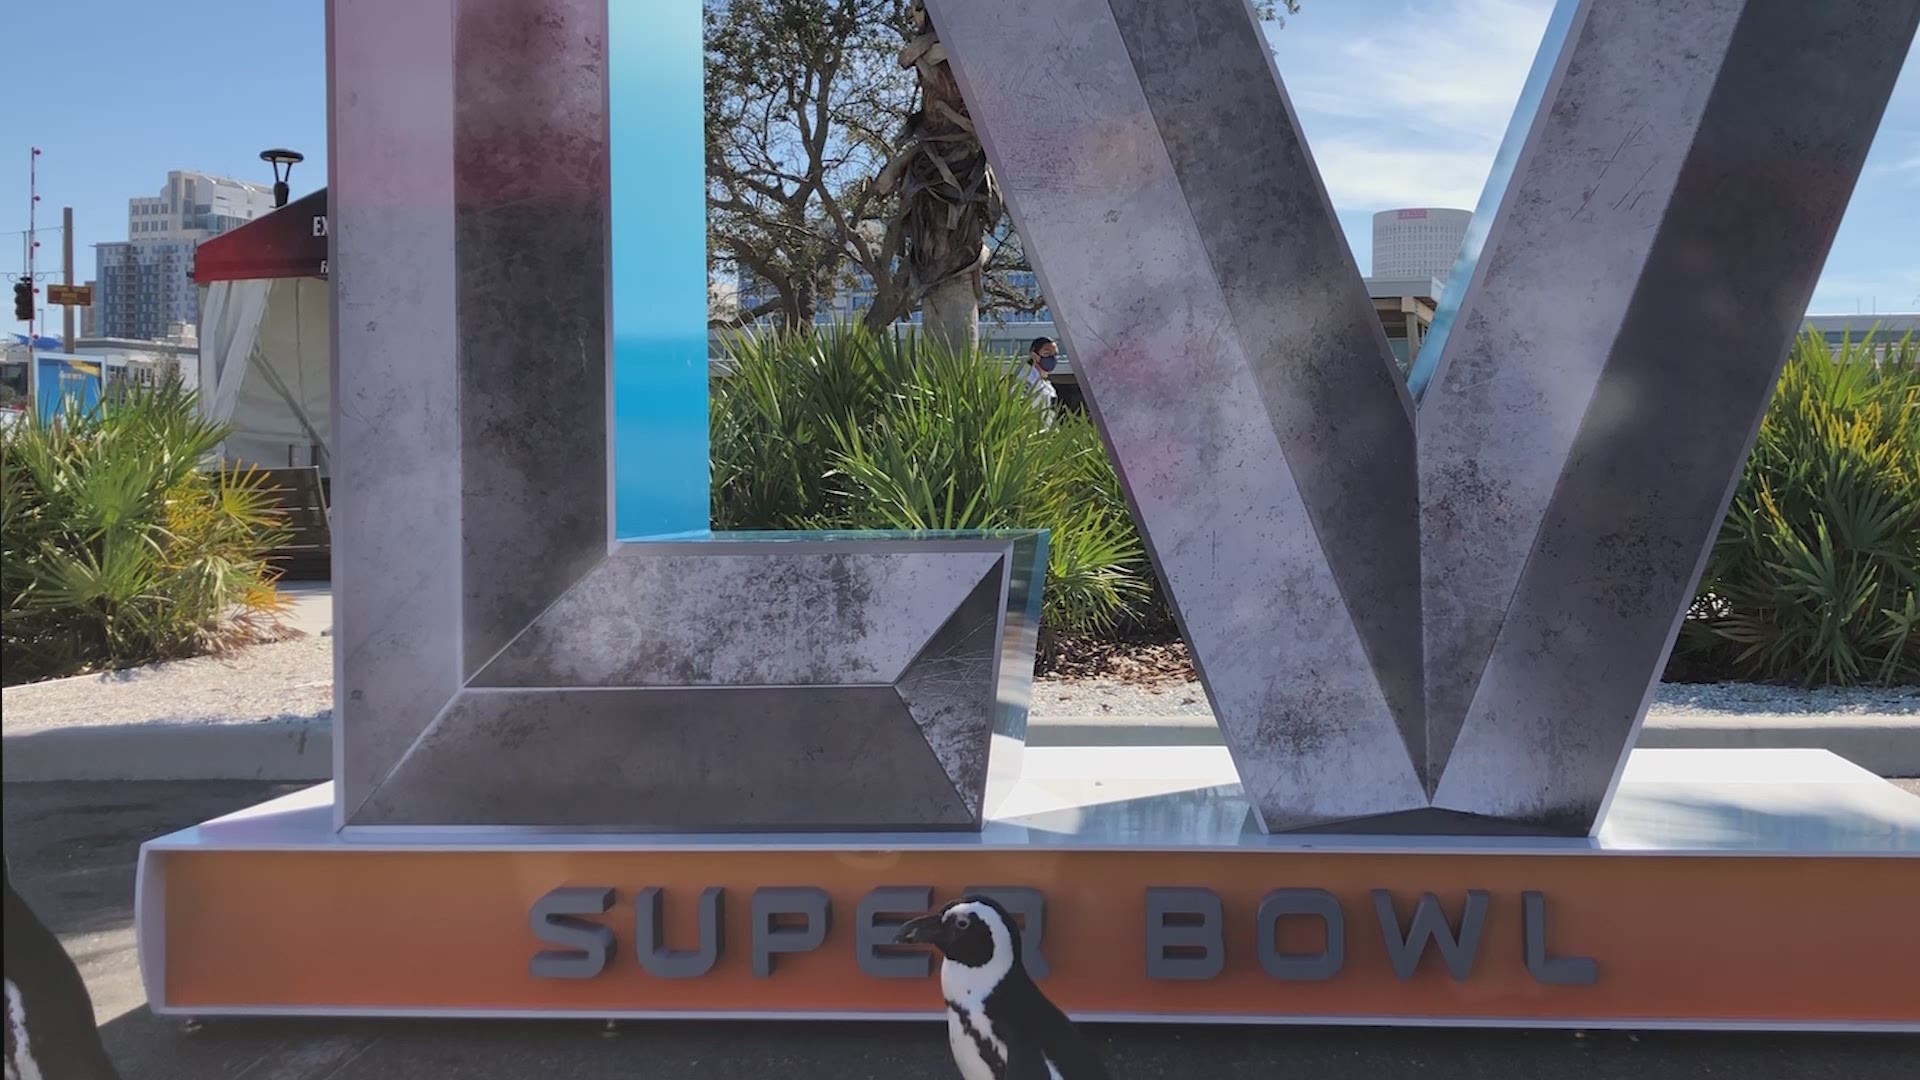 The Florida Aquarium’s African penguins got to check out the Super Bowl Experience in downtown Tampa.